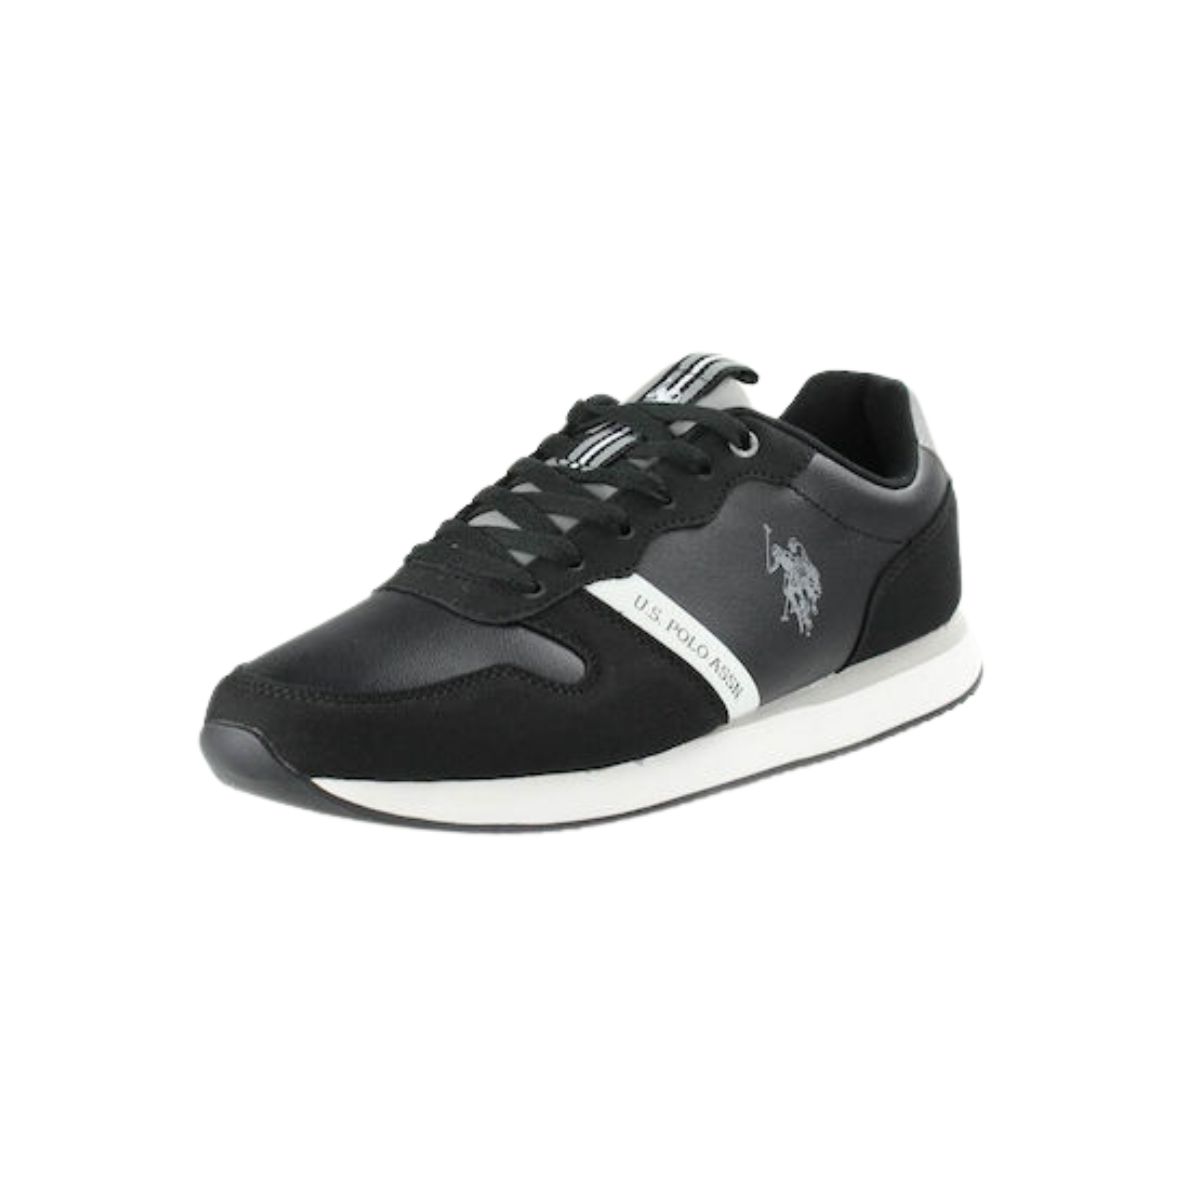 U.S.POLO ASSN, Ανδρικά Sneakers, Sneakers με Κορδόνια, Sneakers Μαύρα, NOBIL009A-BLK